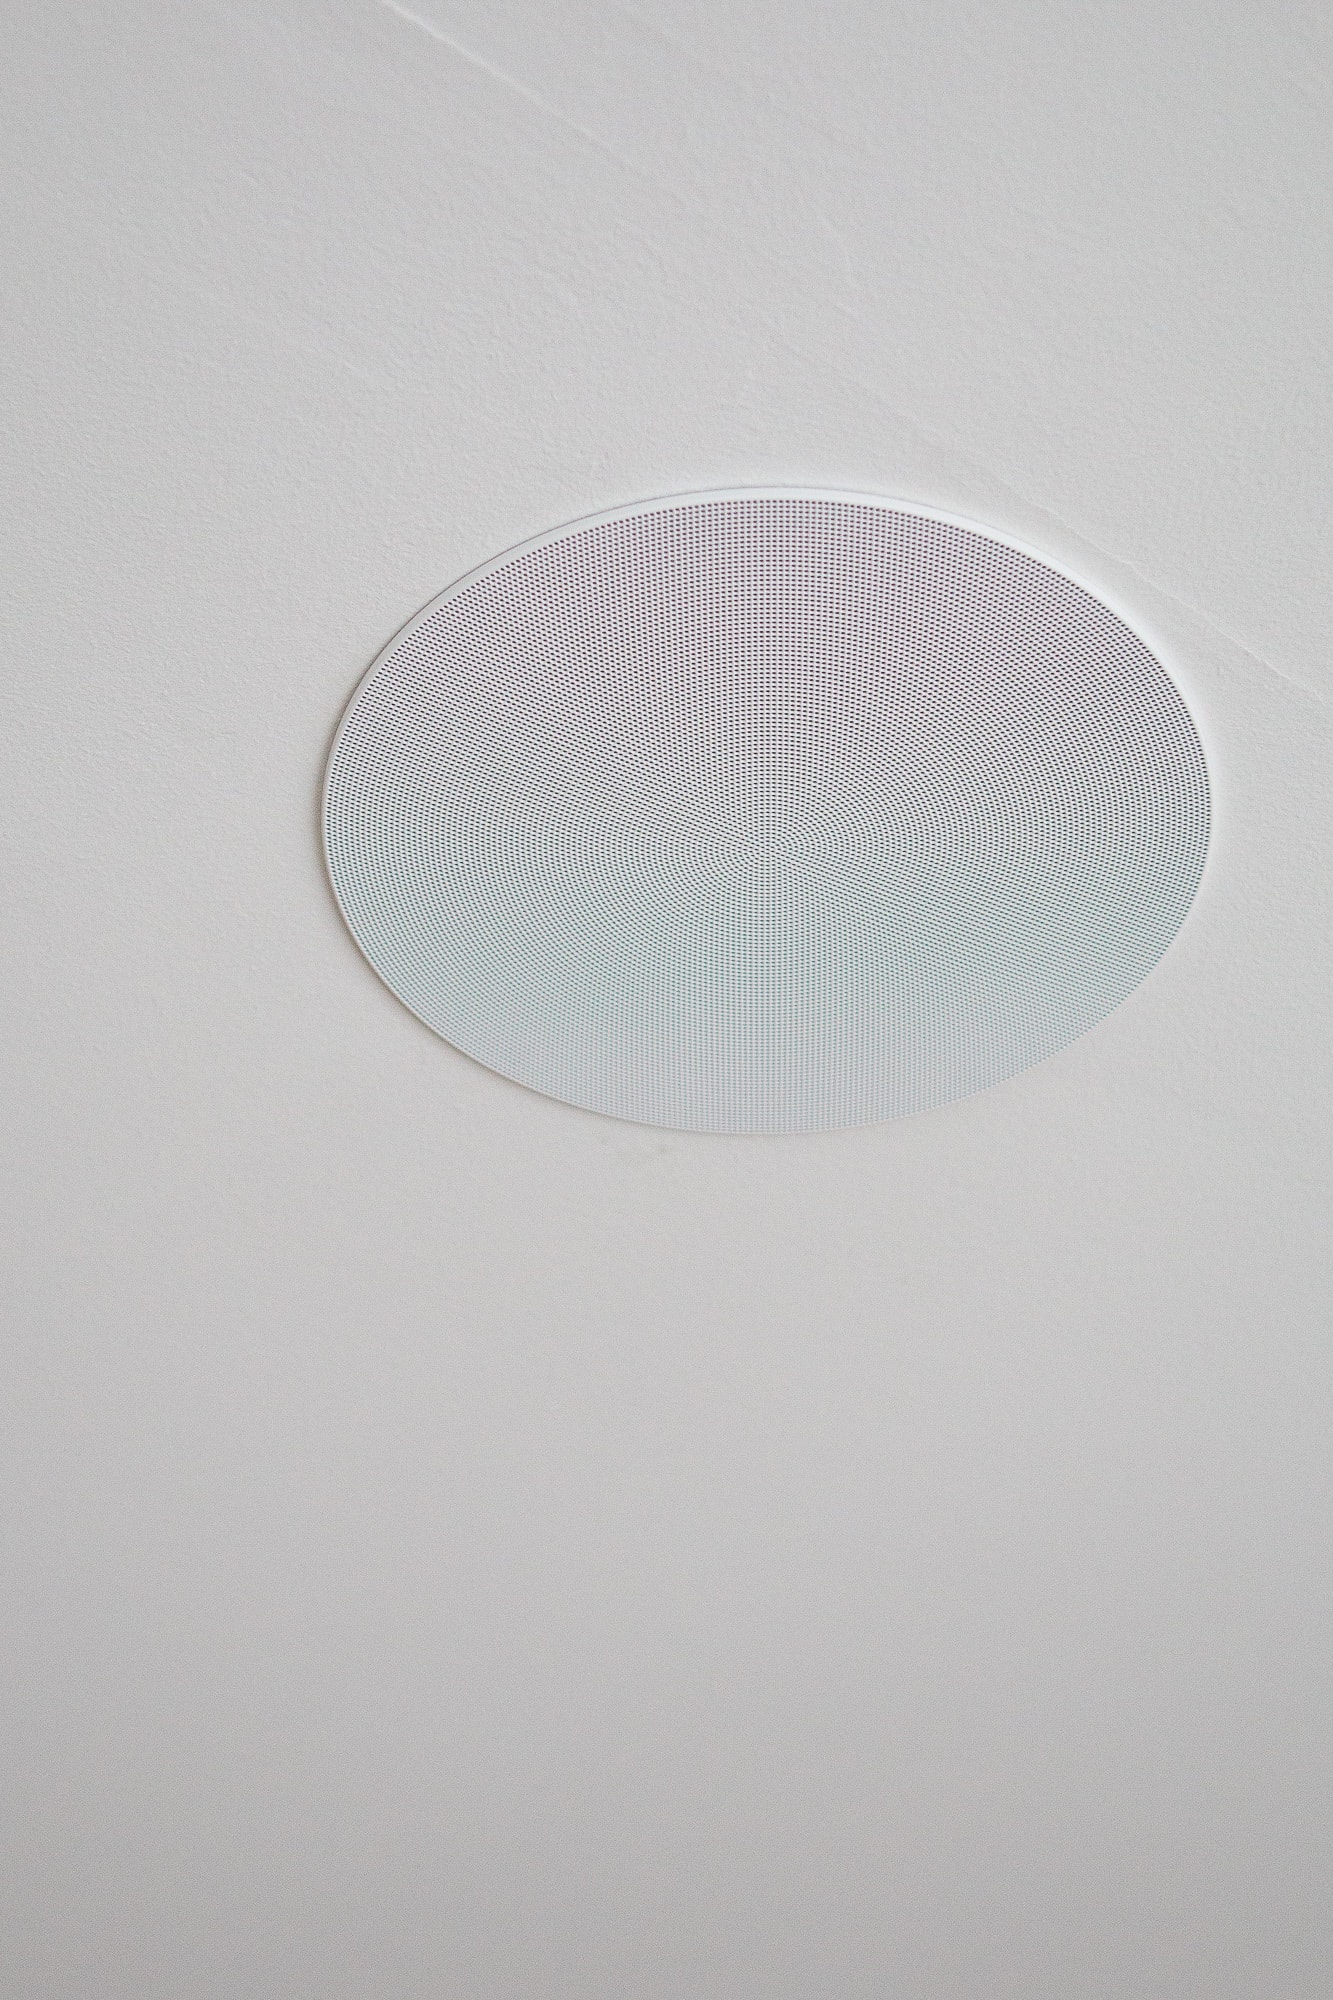 Our sonos speakers in the ceiling